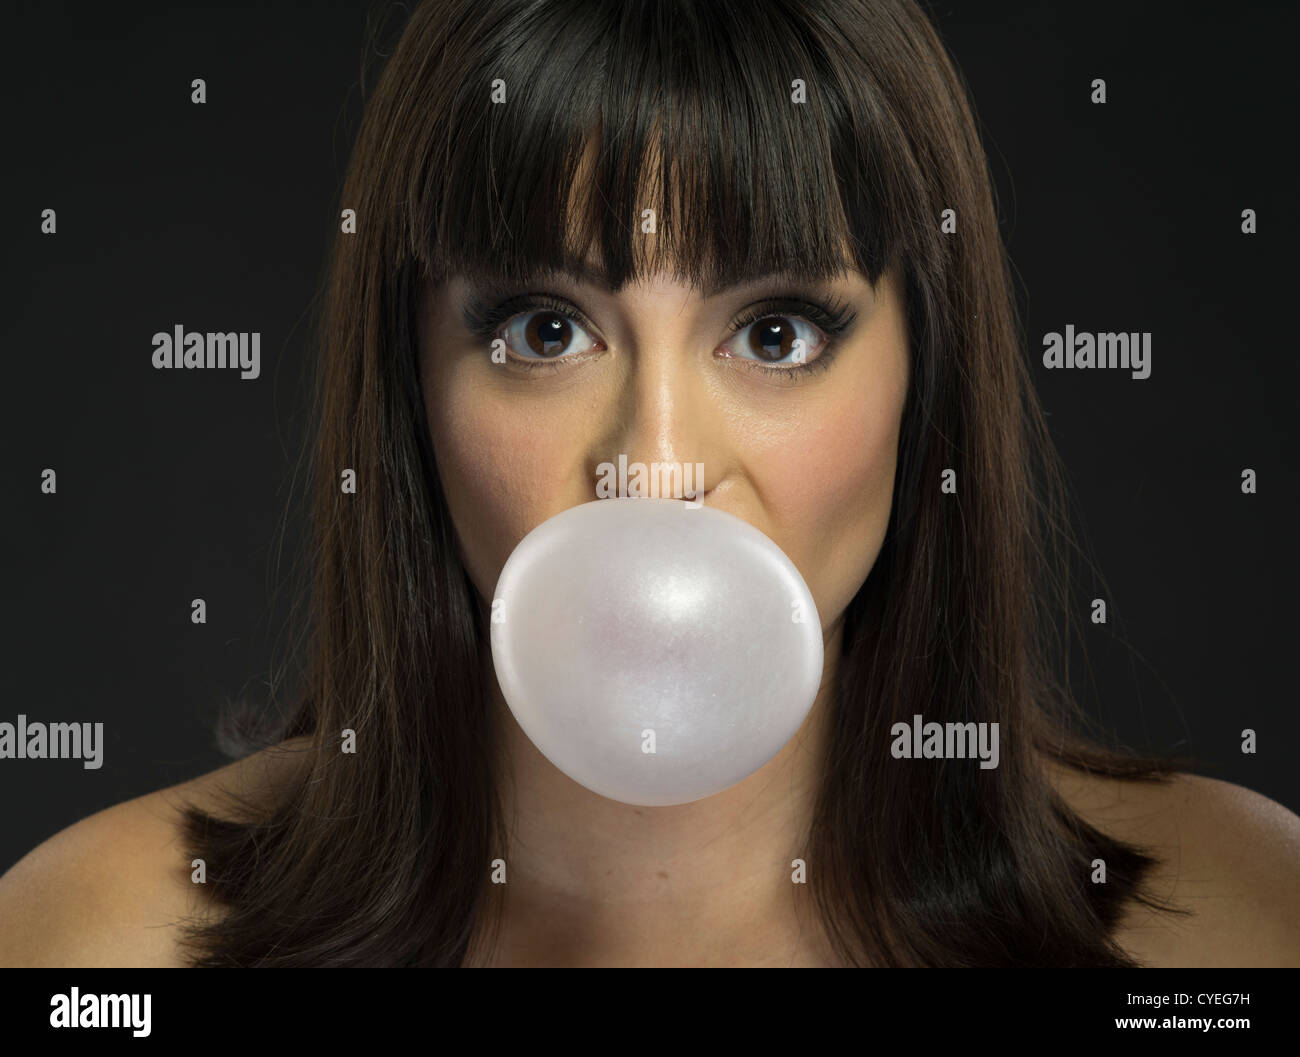 Girl blowing a bubble with pink bubble gum Stock Photo